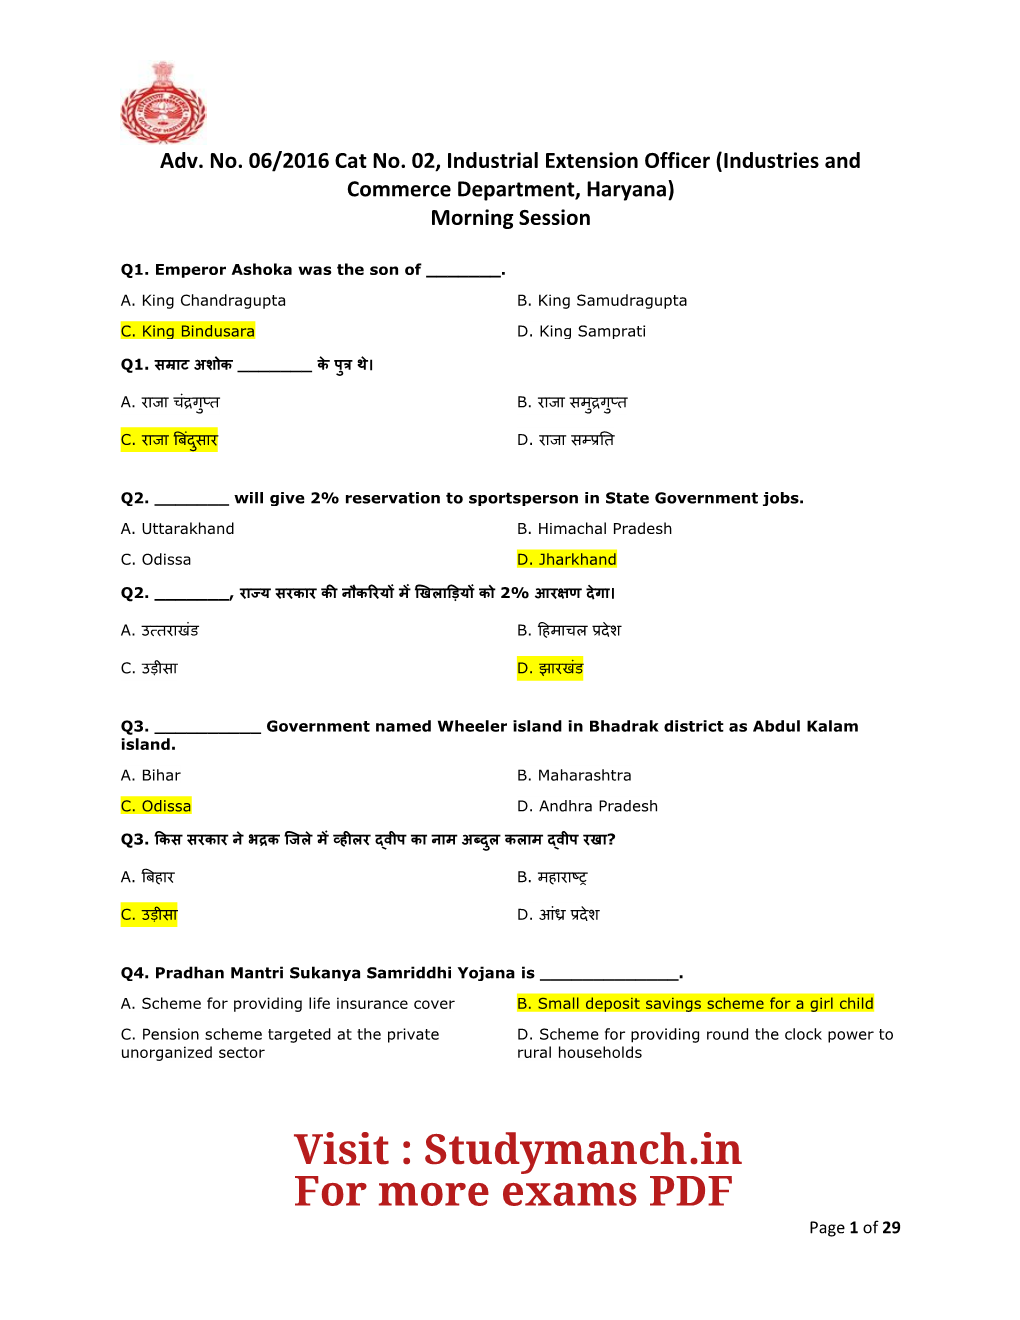 Visit : Studymanch.In for More Exams PDF Page 1 of 29